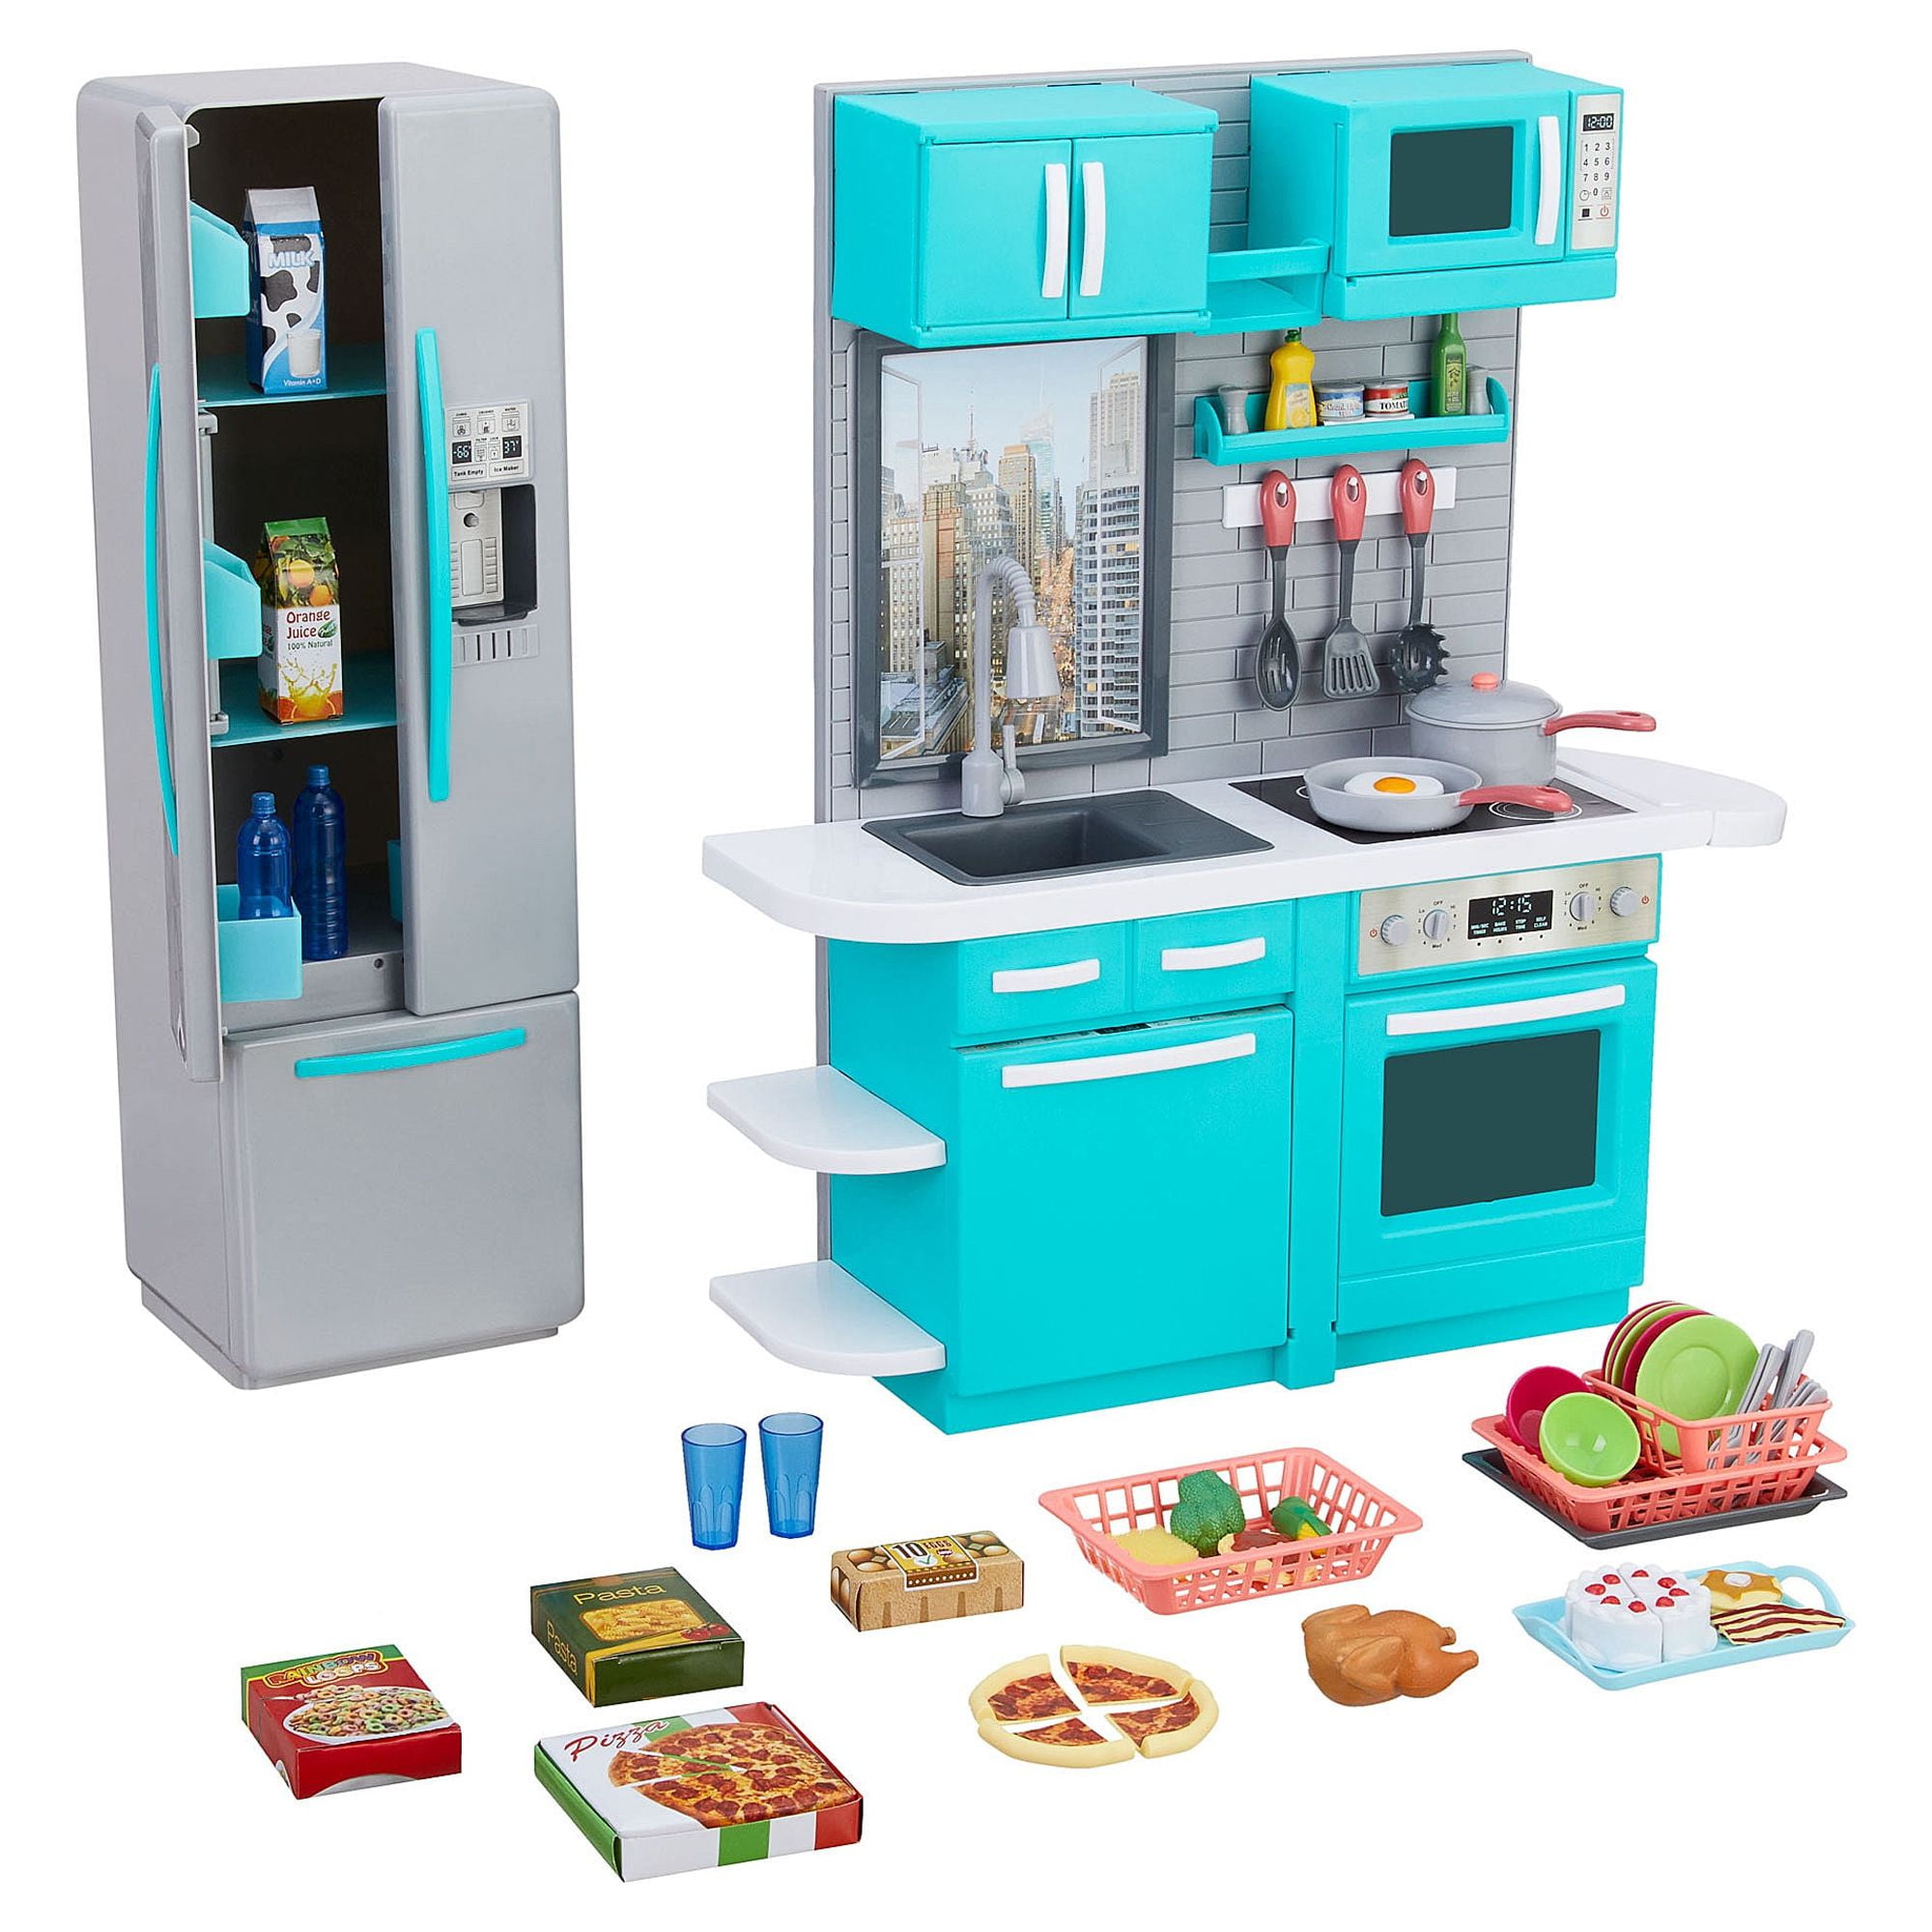 My Life As Full Kitchen Playset with Light & Sound for 18” Doll